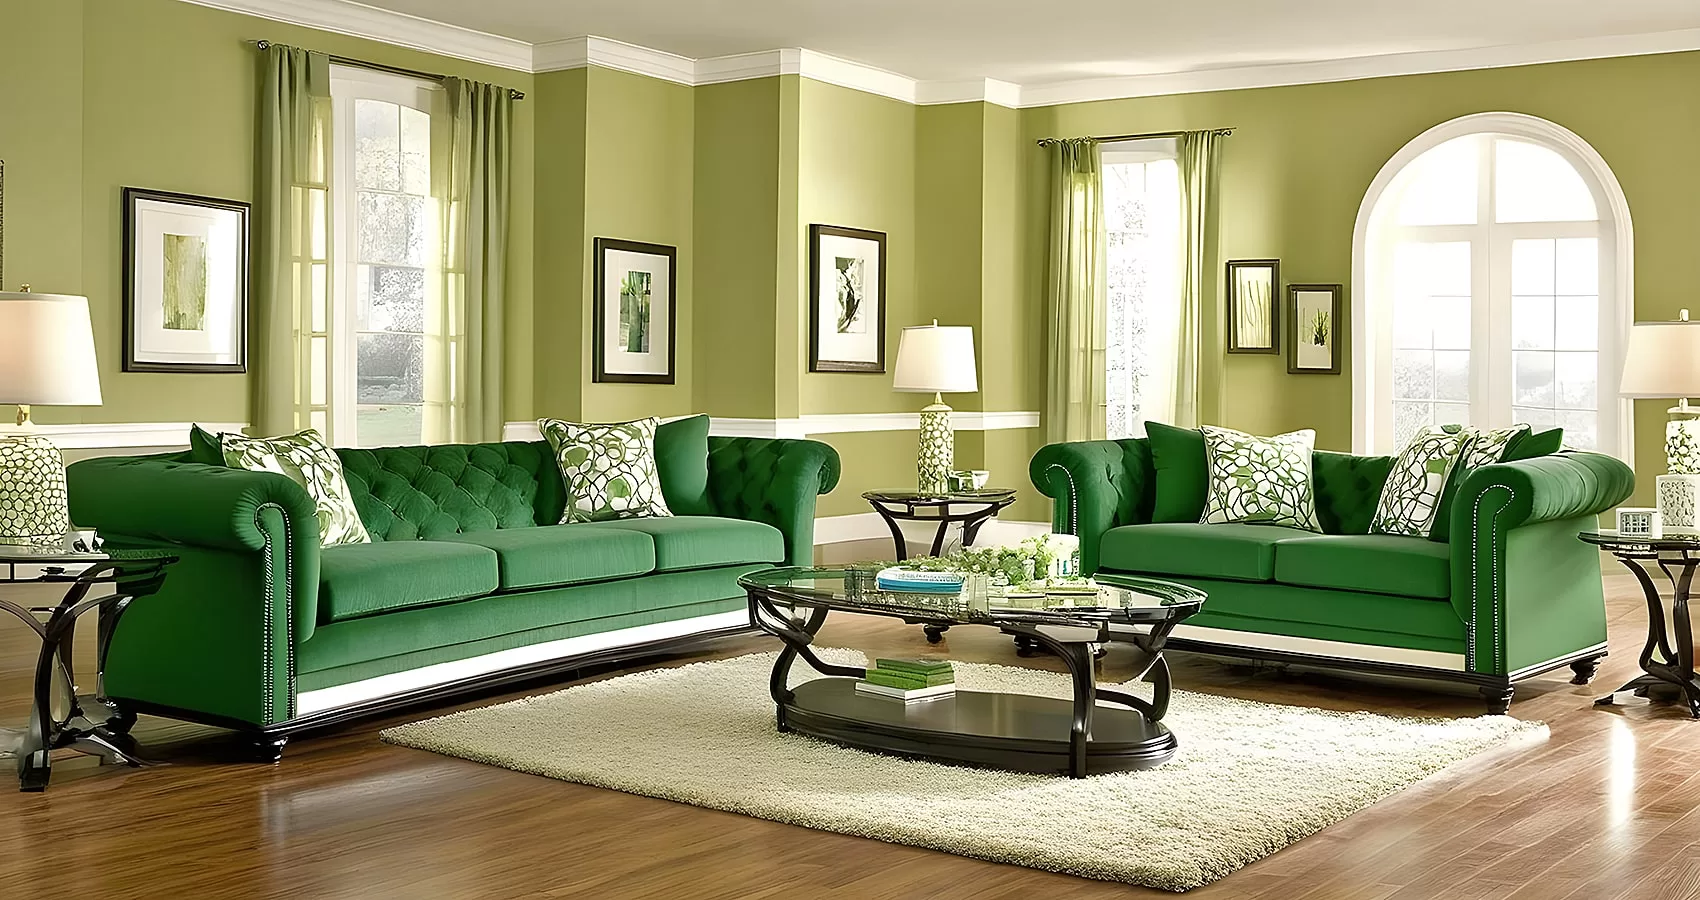 Green Couch Living Rooms | Green Sofa Living Room | Green Couch Living Room | Living Room Ideas Green Couch